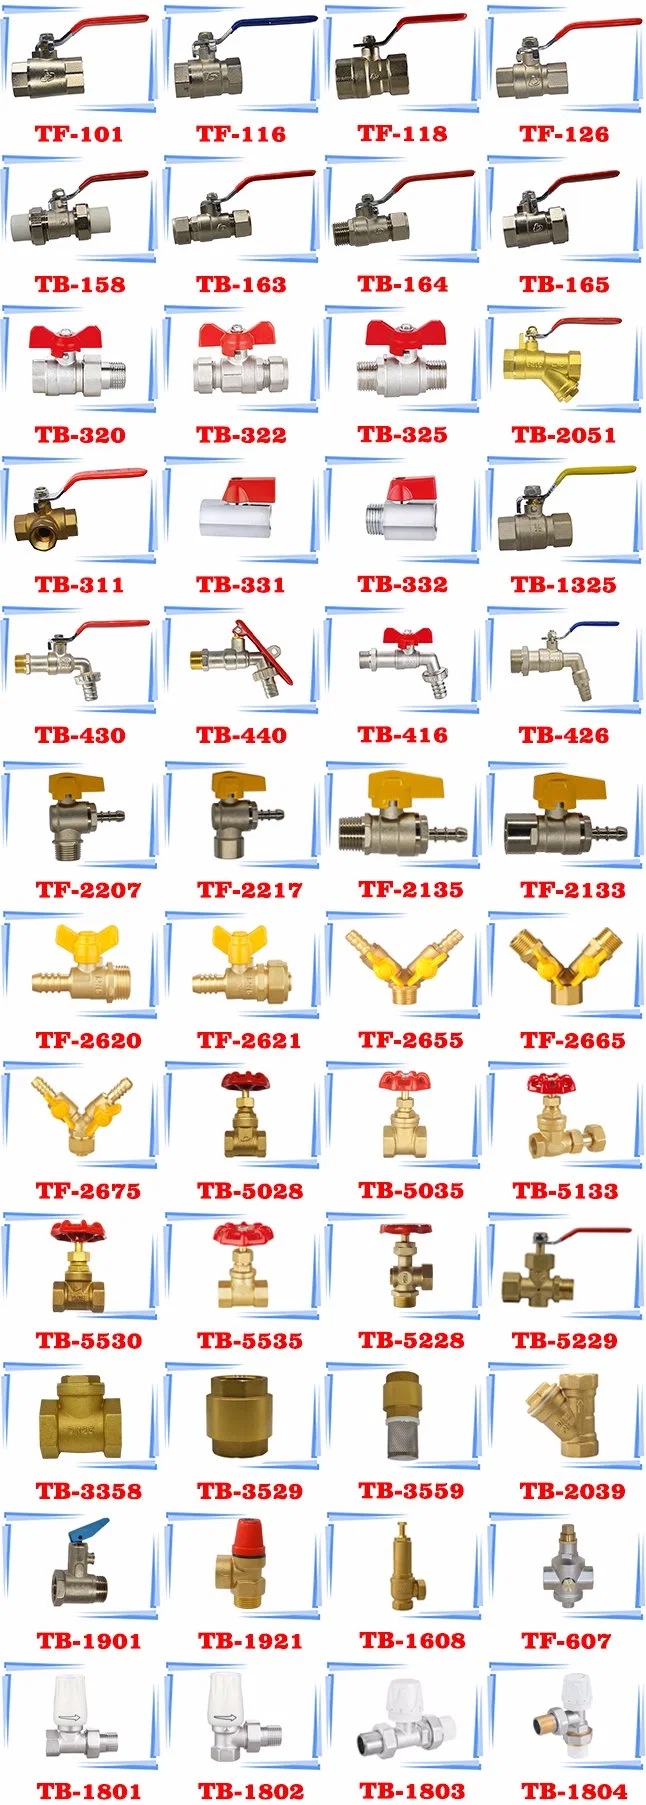 Brass Elbow Fittings Pipe Fittings 90 Degree, Push Fit Fitting DN8, 4/1 Brass Press Fitting for Pex-Al-Pex Pipe